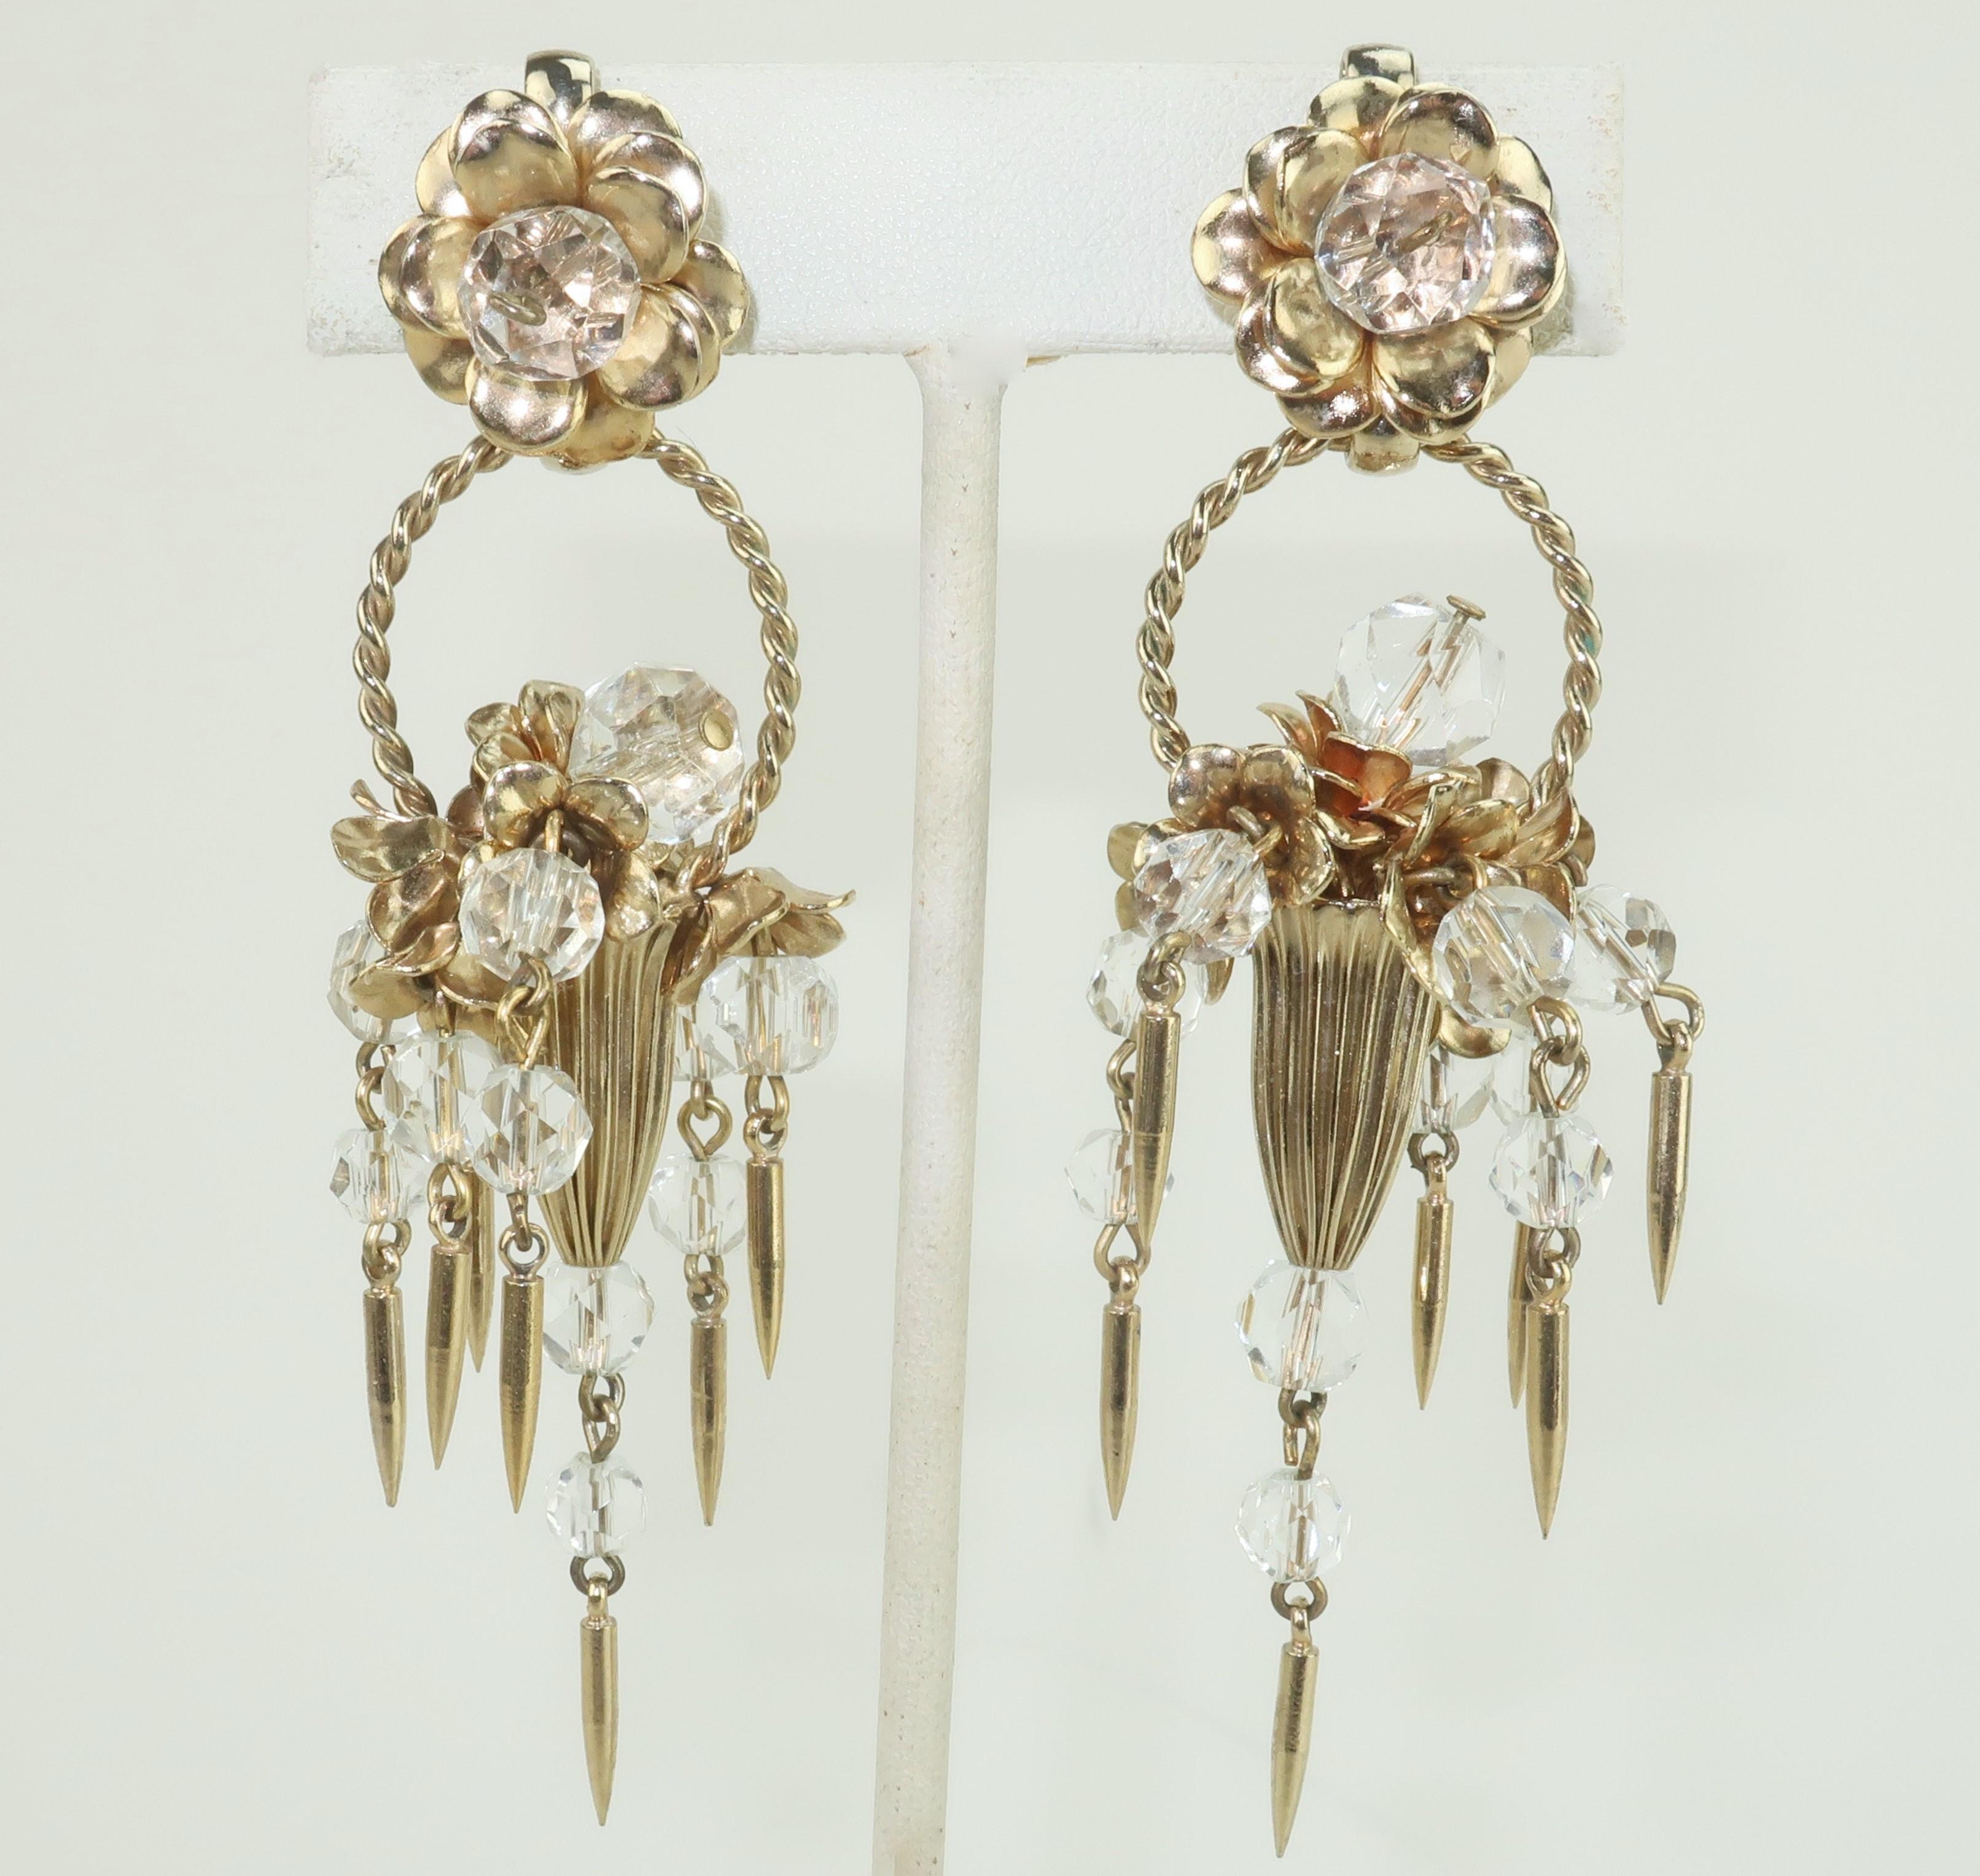 A beautiful pair of 1950's flower basket earrings by the venerable American costume jewelry company, Napier.  The intricate chandelier style gold tone earrings are decorated with faceted crystal beads and dagger shaped drops that create a design